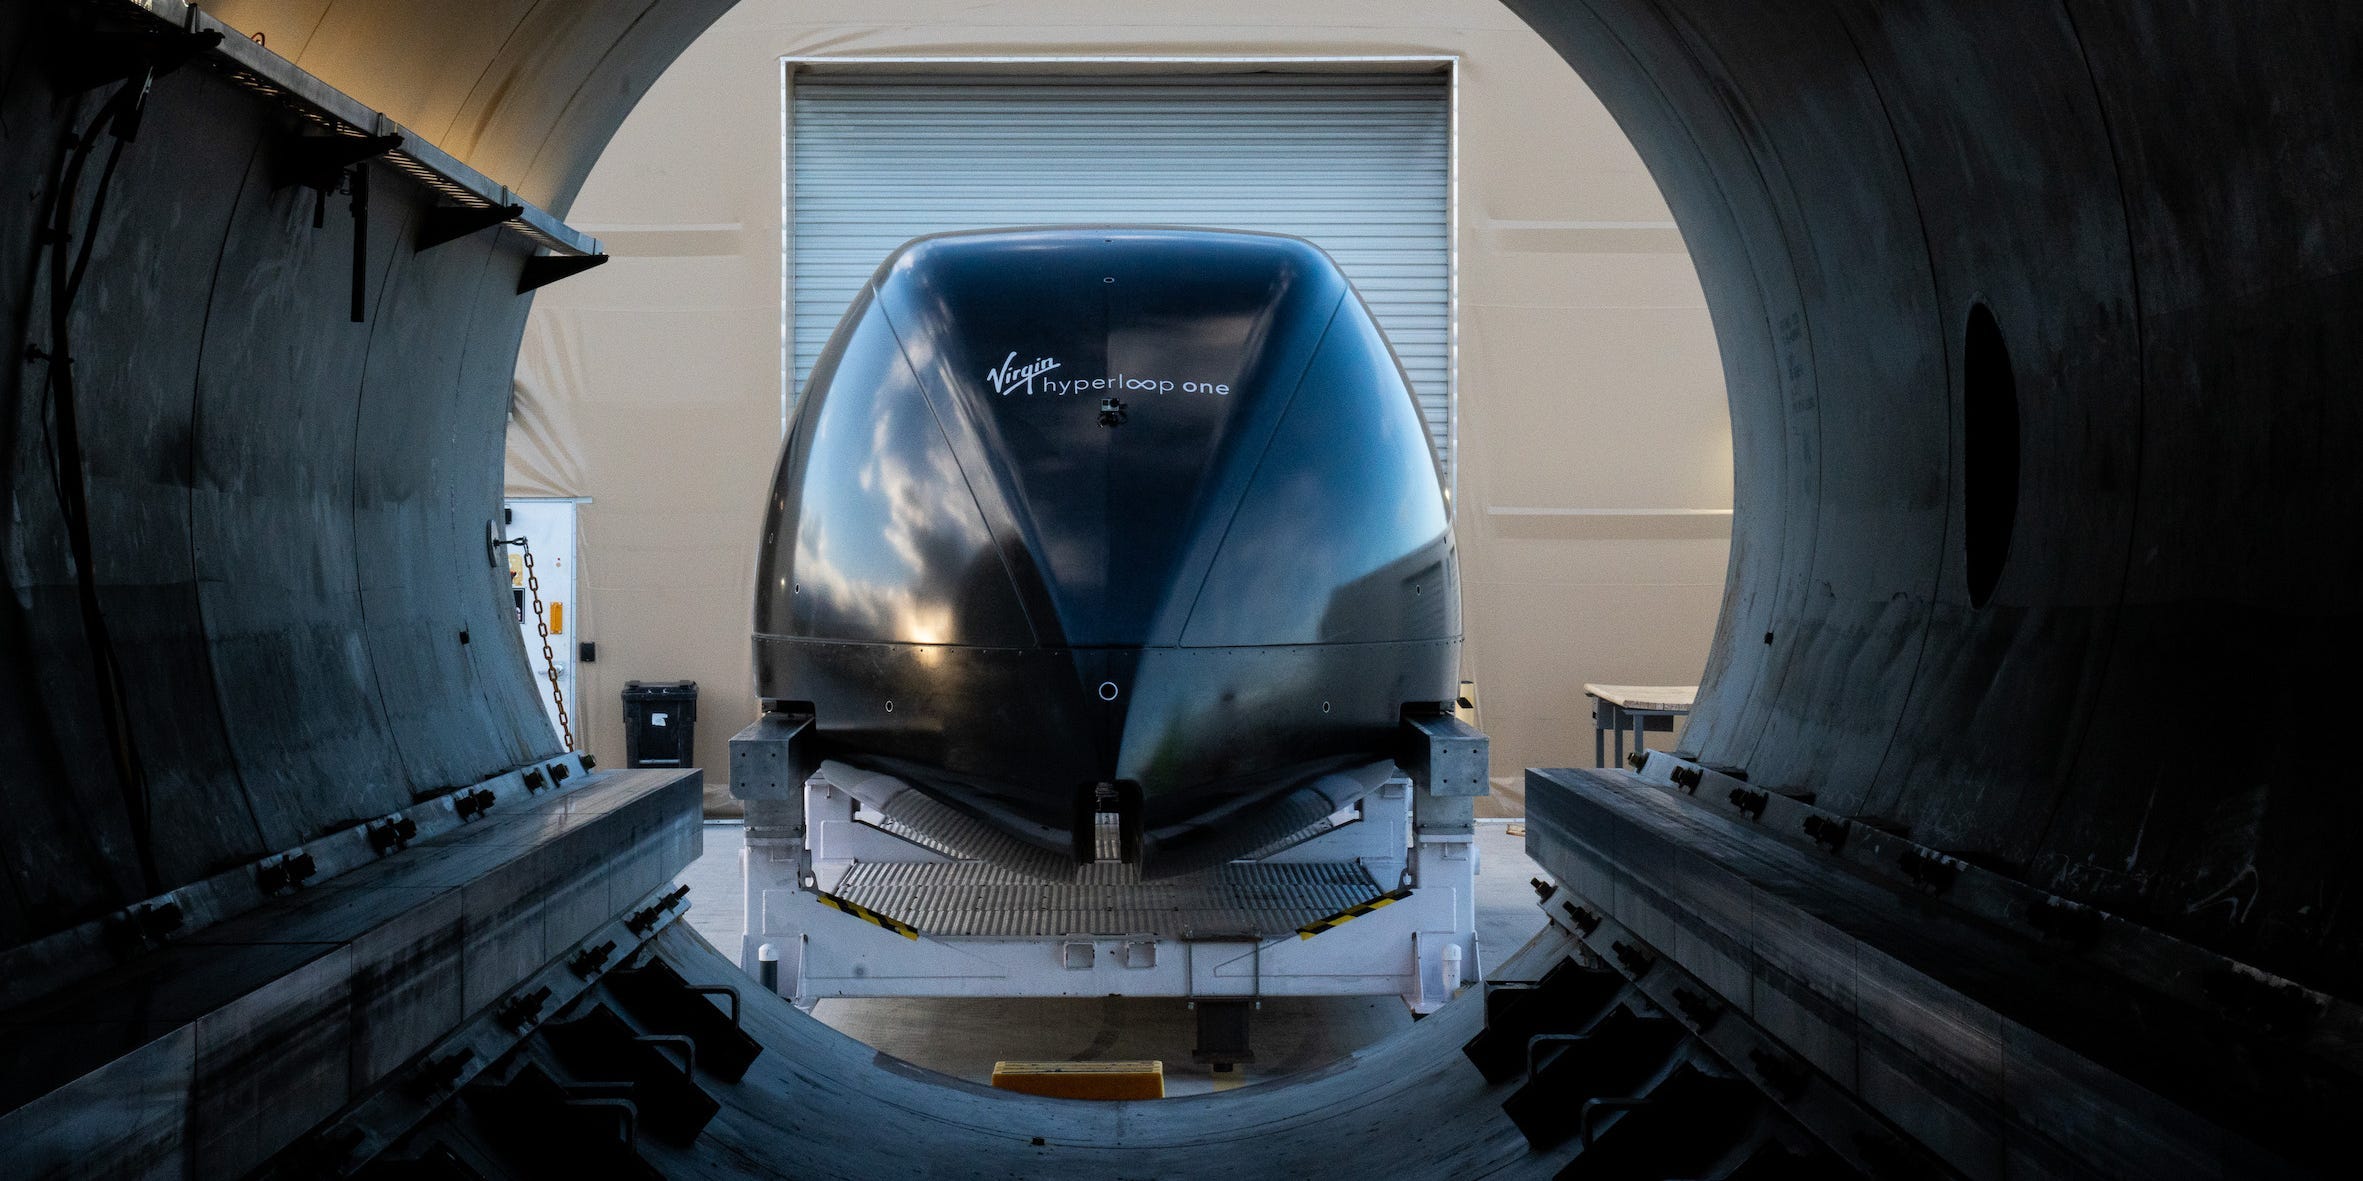 Virgin Hyperloop completed the first passenger ride in its levitating transport system, reaching speeds faster than 100 mph